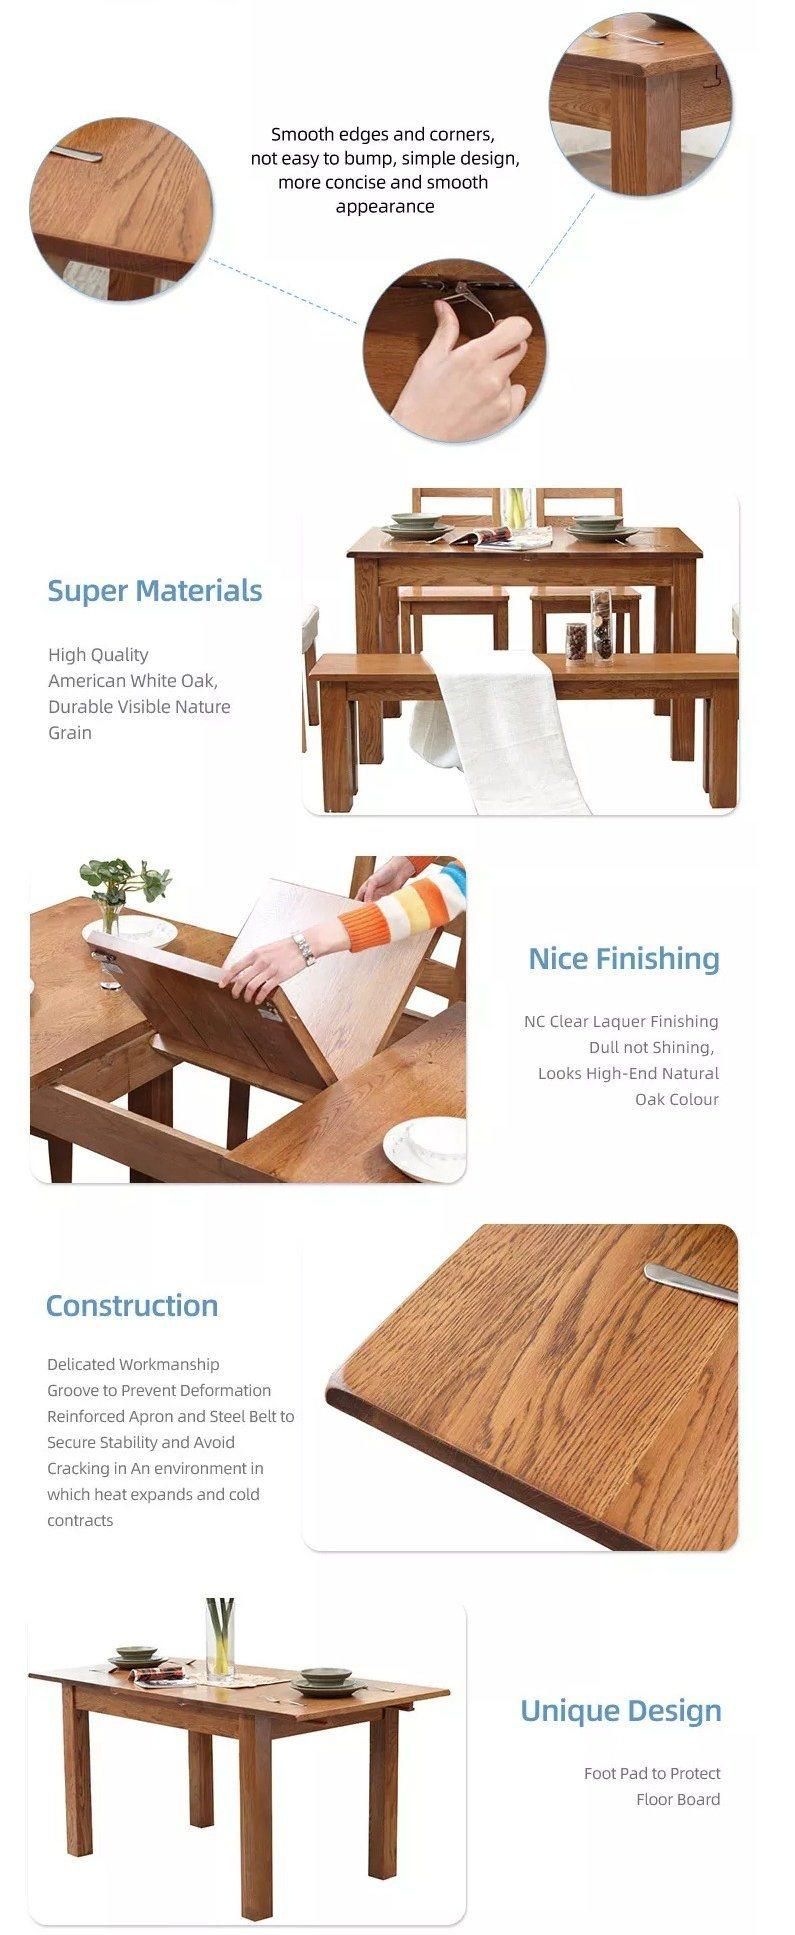 Furniture Modern Furniture Table Home Furniture Wooden Furniture Solid Oak Antique Brown Wood Style Space Saving Extendable to 6 Seater Dining Table and Chairs